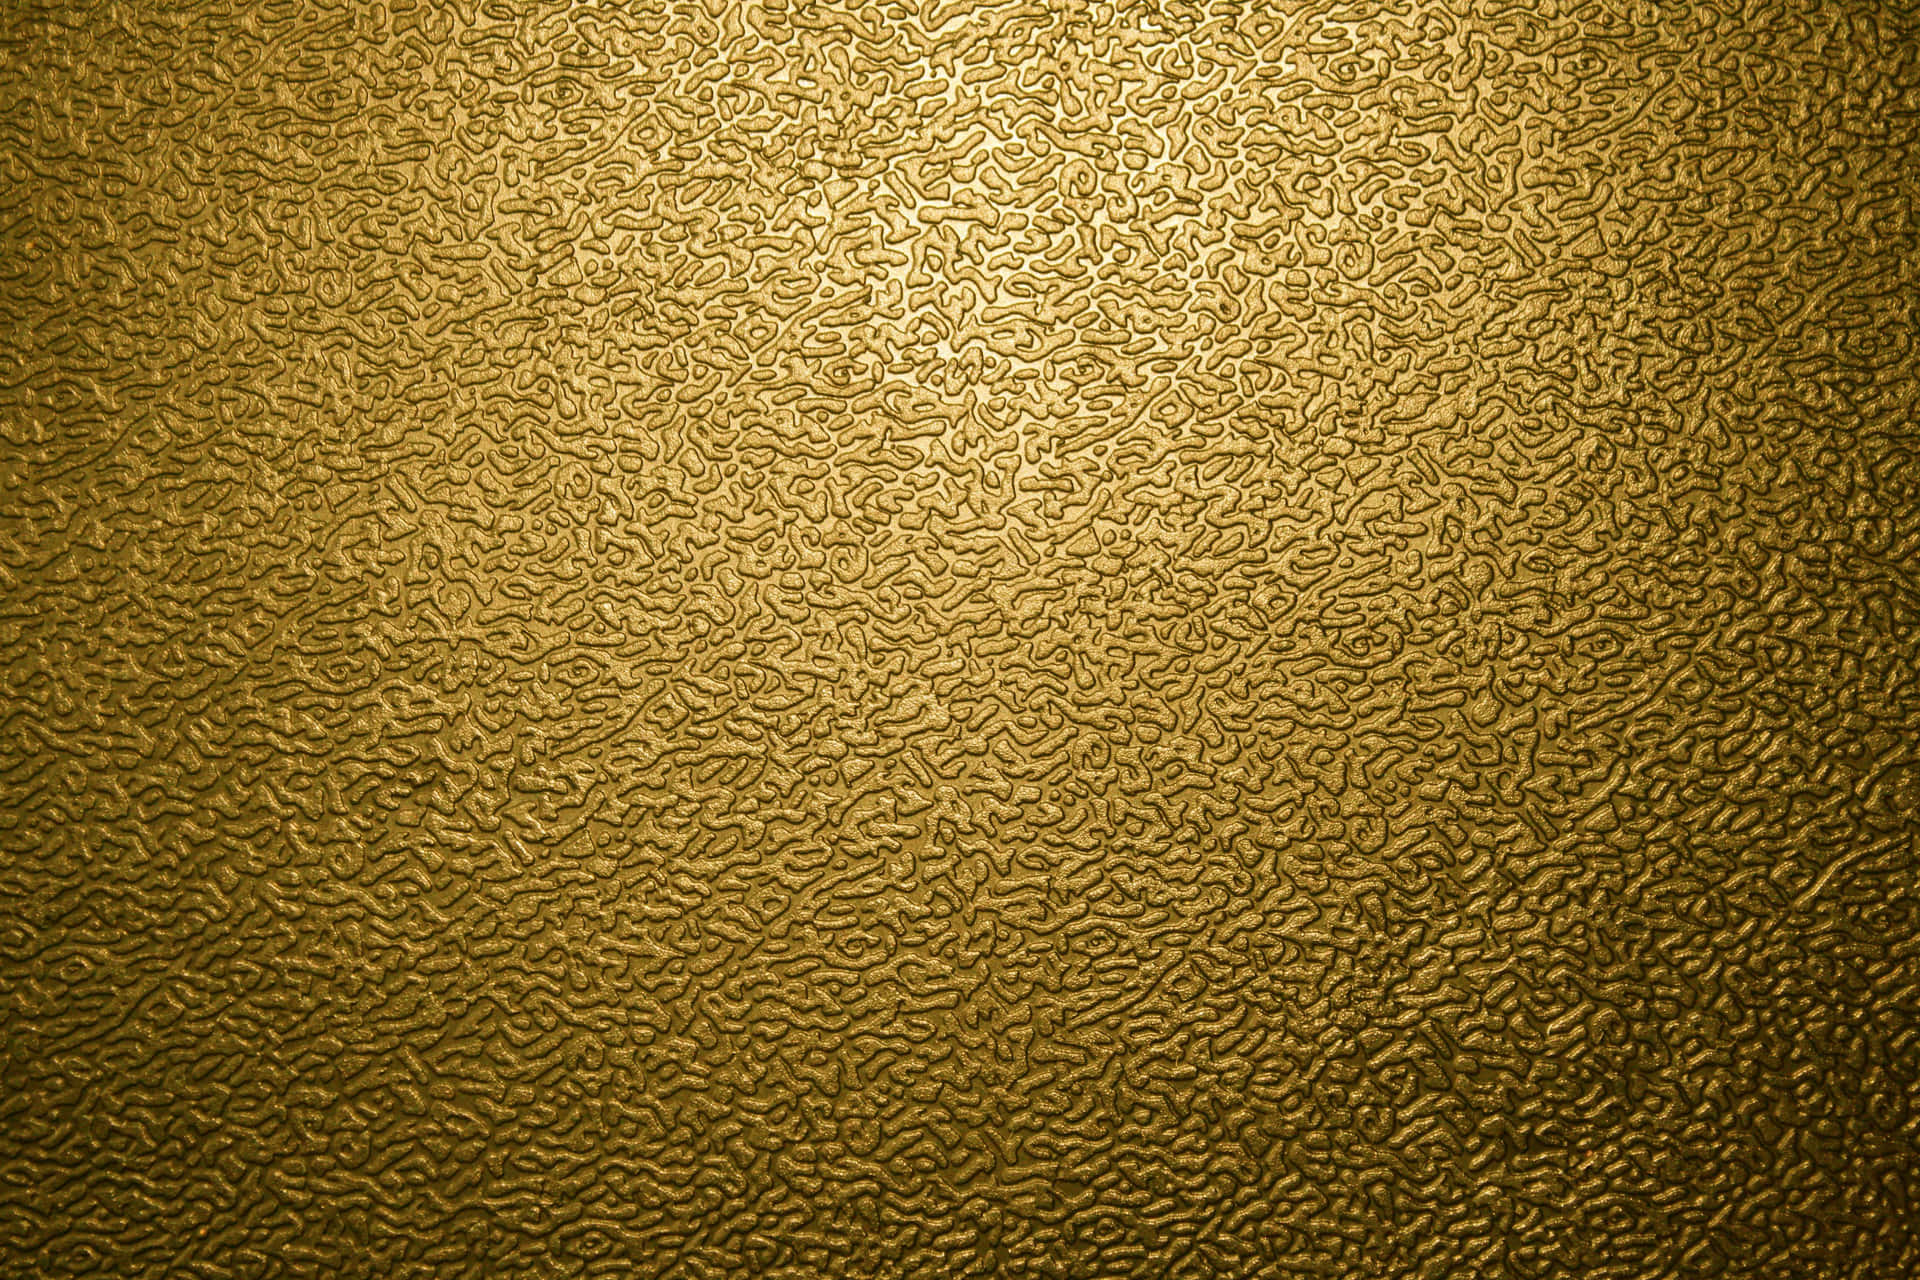 Image  Metallic Gold Abstract Background